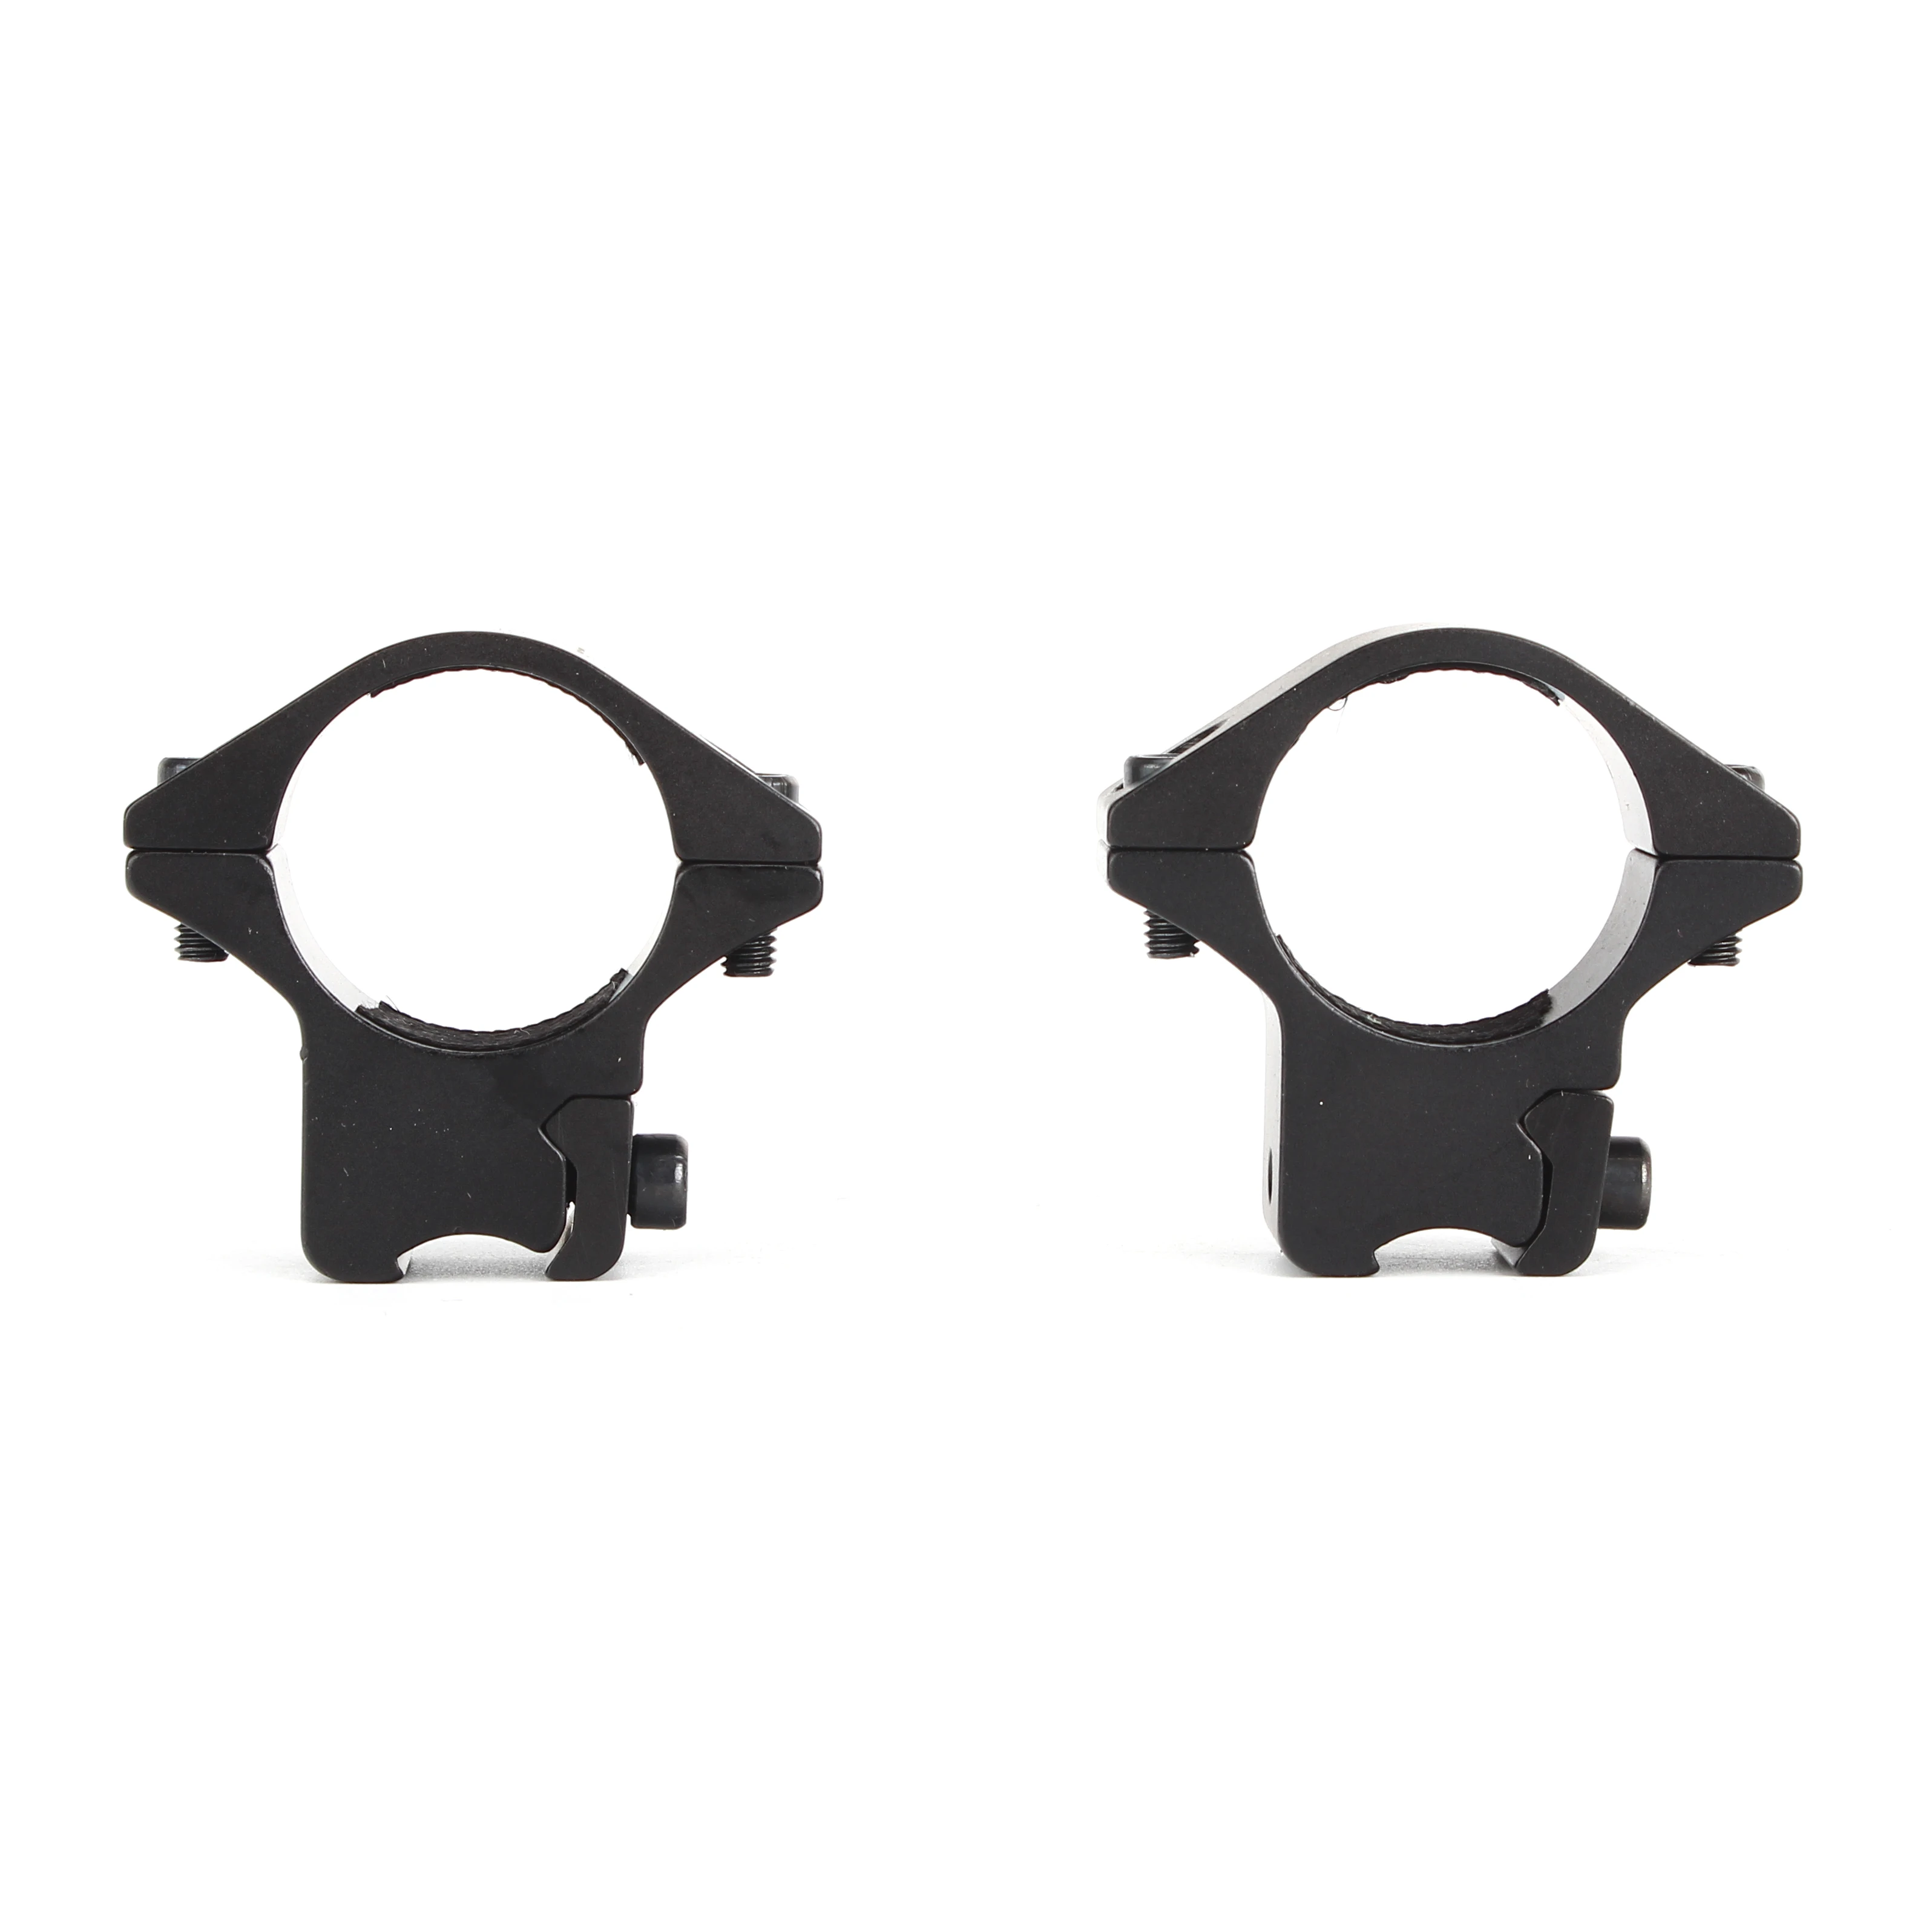 OEM ODM Scope Mount Rings 25.4mm Scope Mounts Hunting Optic Sight Accessories 1" Scope Rings 11mm